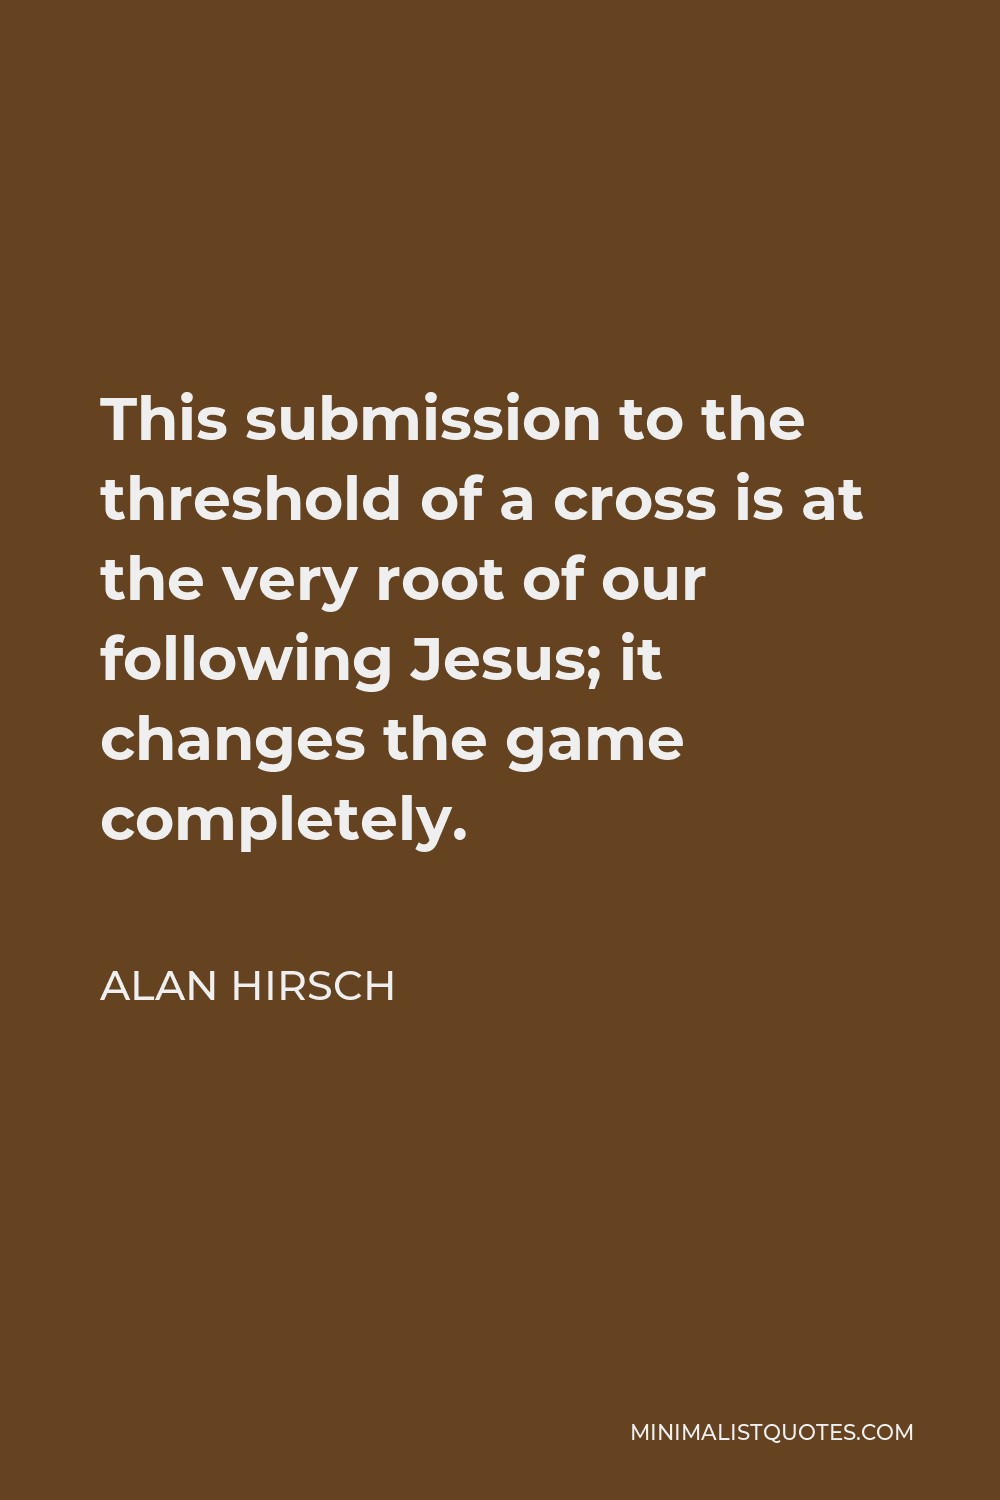 Alan Hirsch Quote - This submission to the threshold of a cross is at the very root of our following Jesus; it changes the game completely.